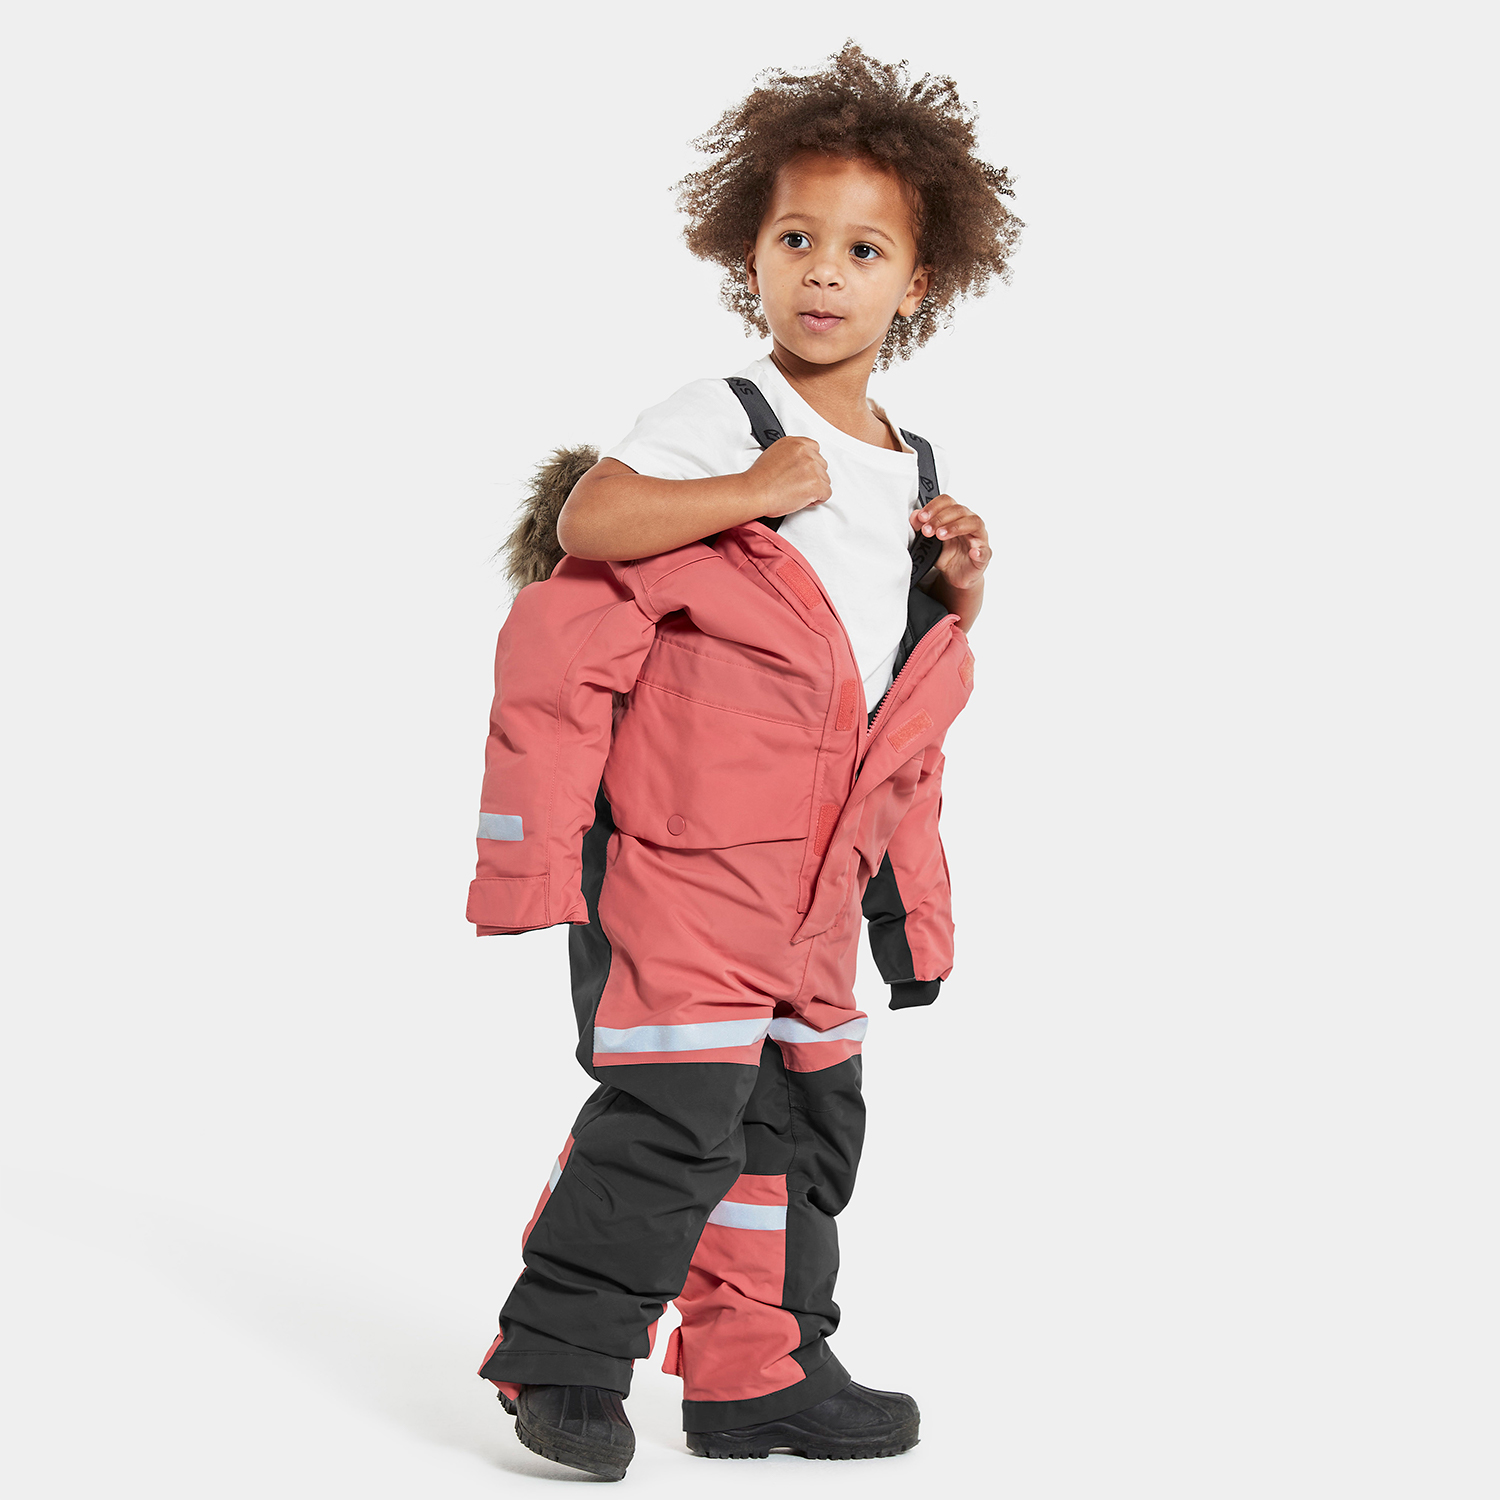 bjarven_kids_coverall_504579_509_10front2_m222.jpg